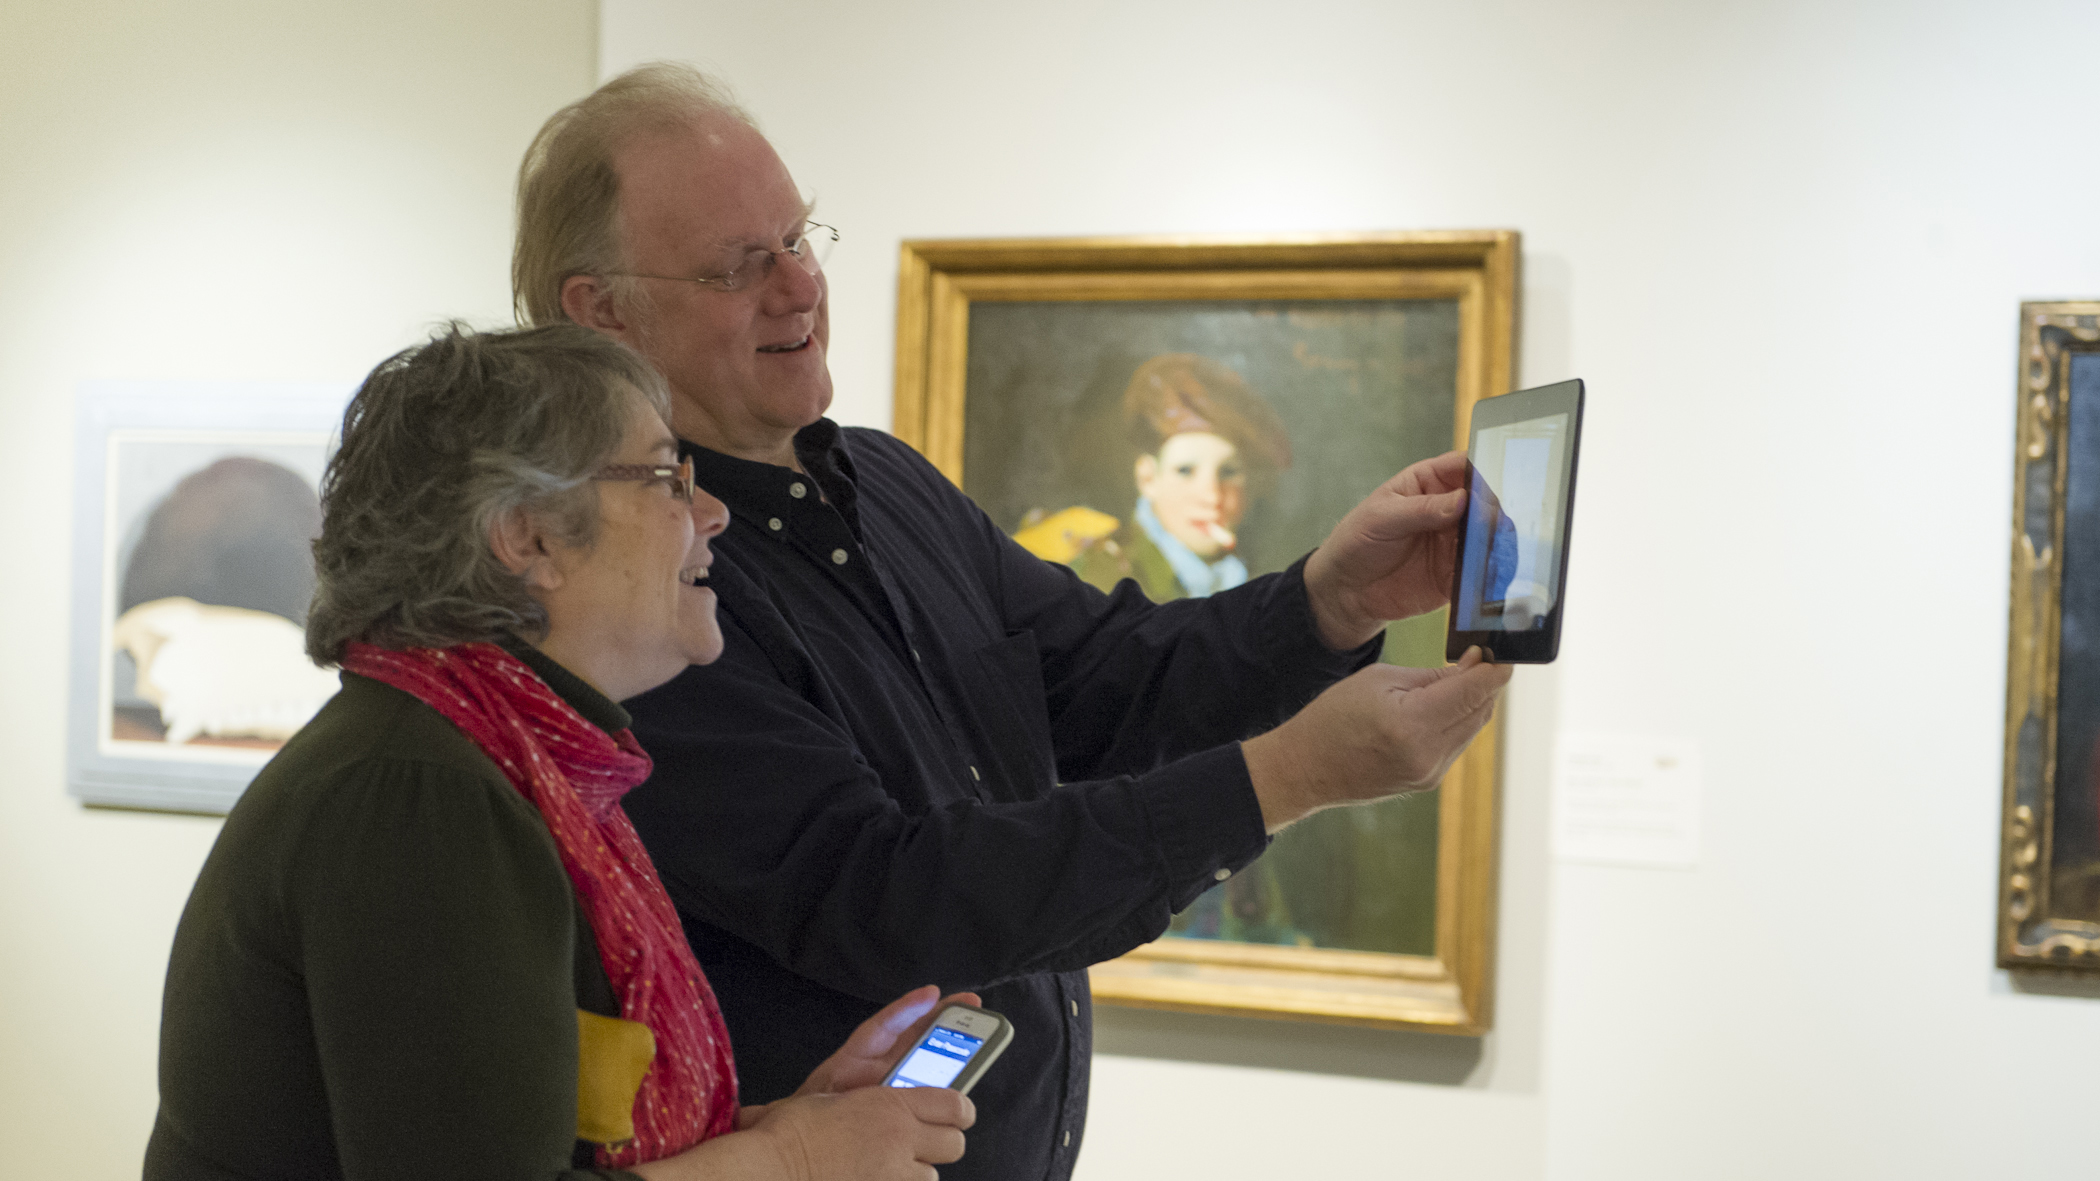 Two people looking at artwork on a tablet, in an art gallery.